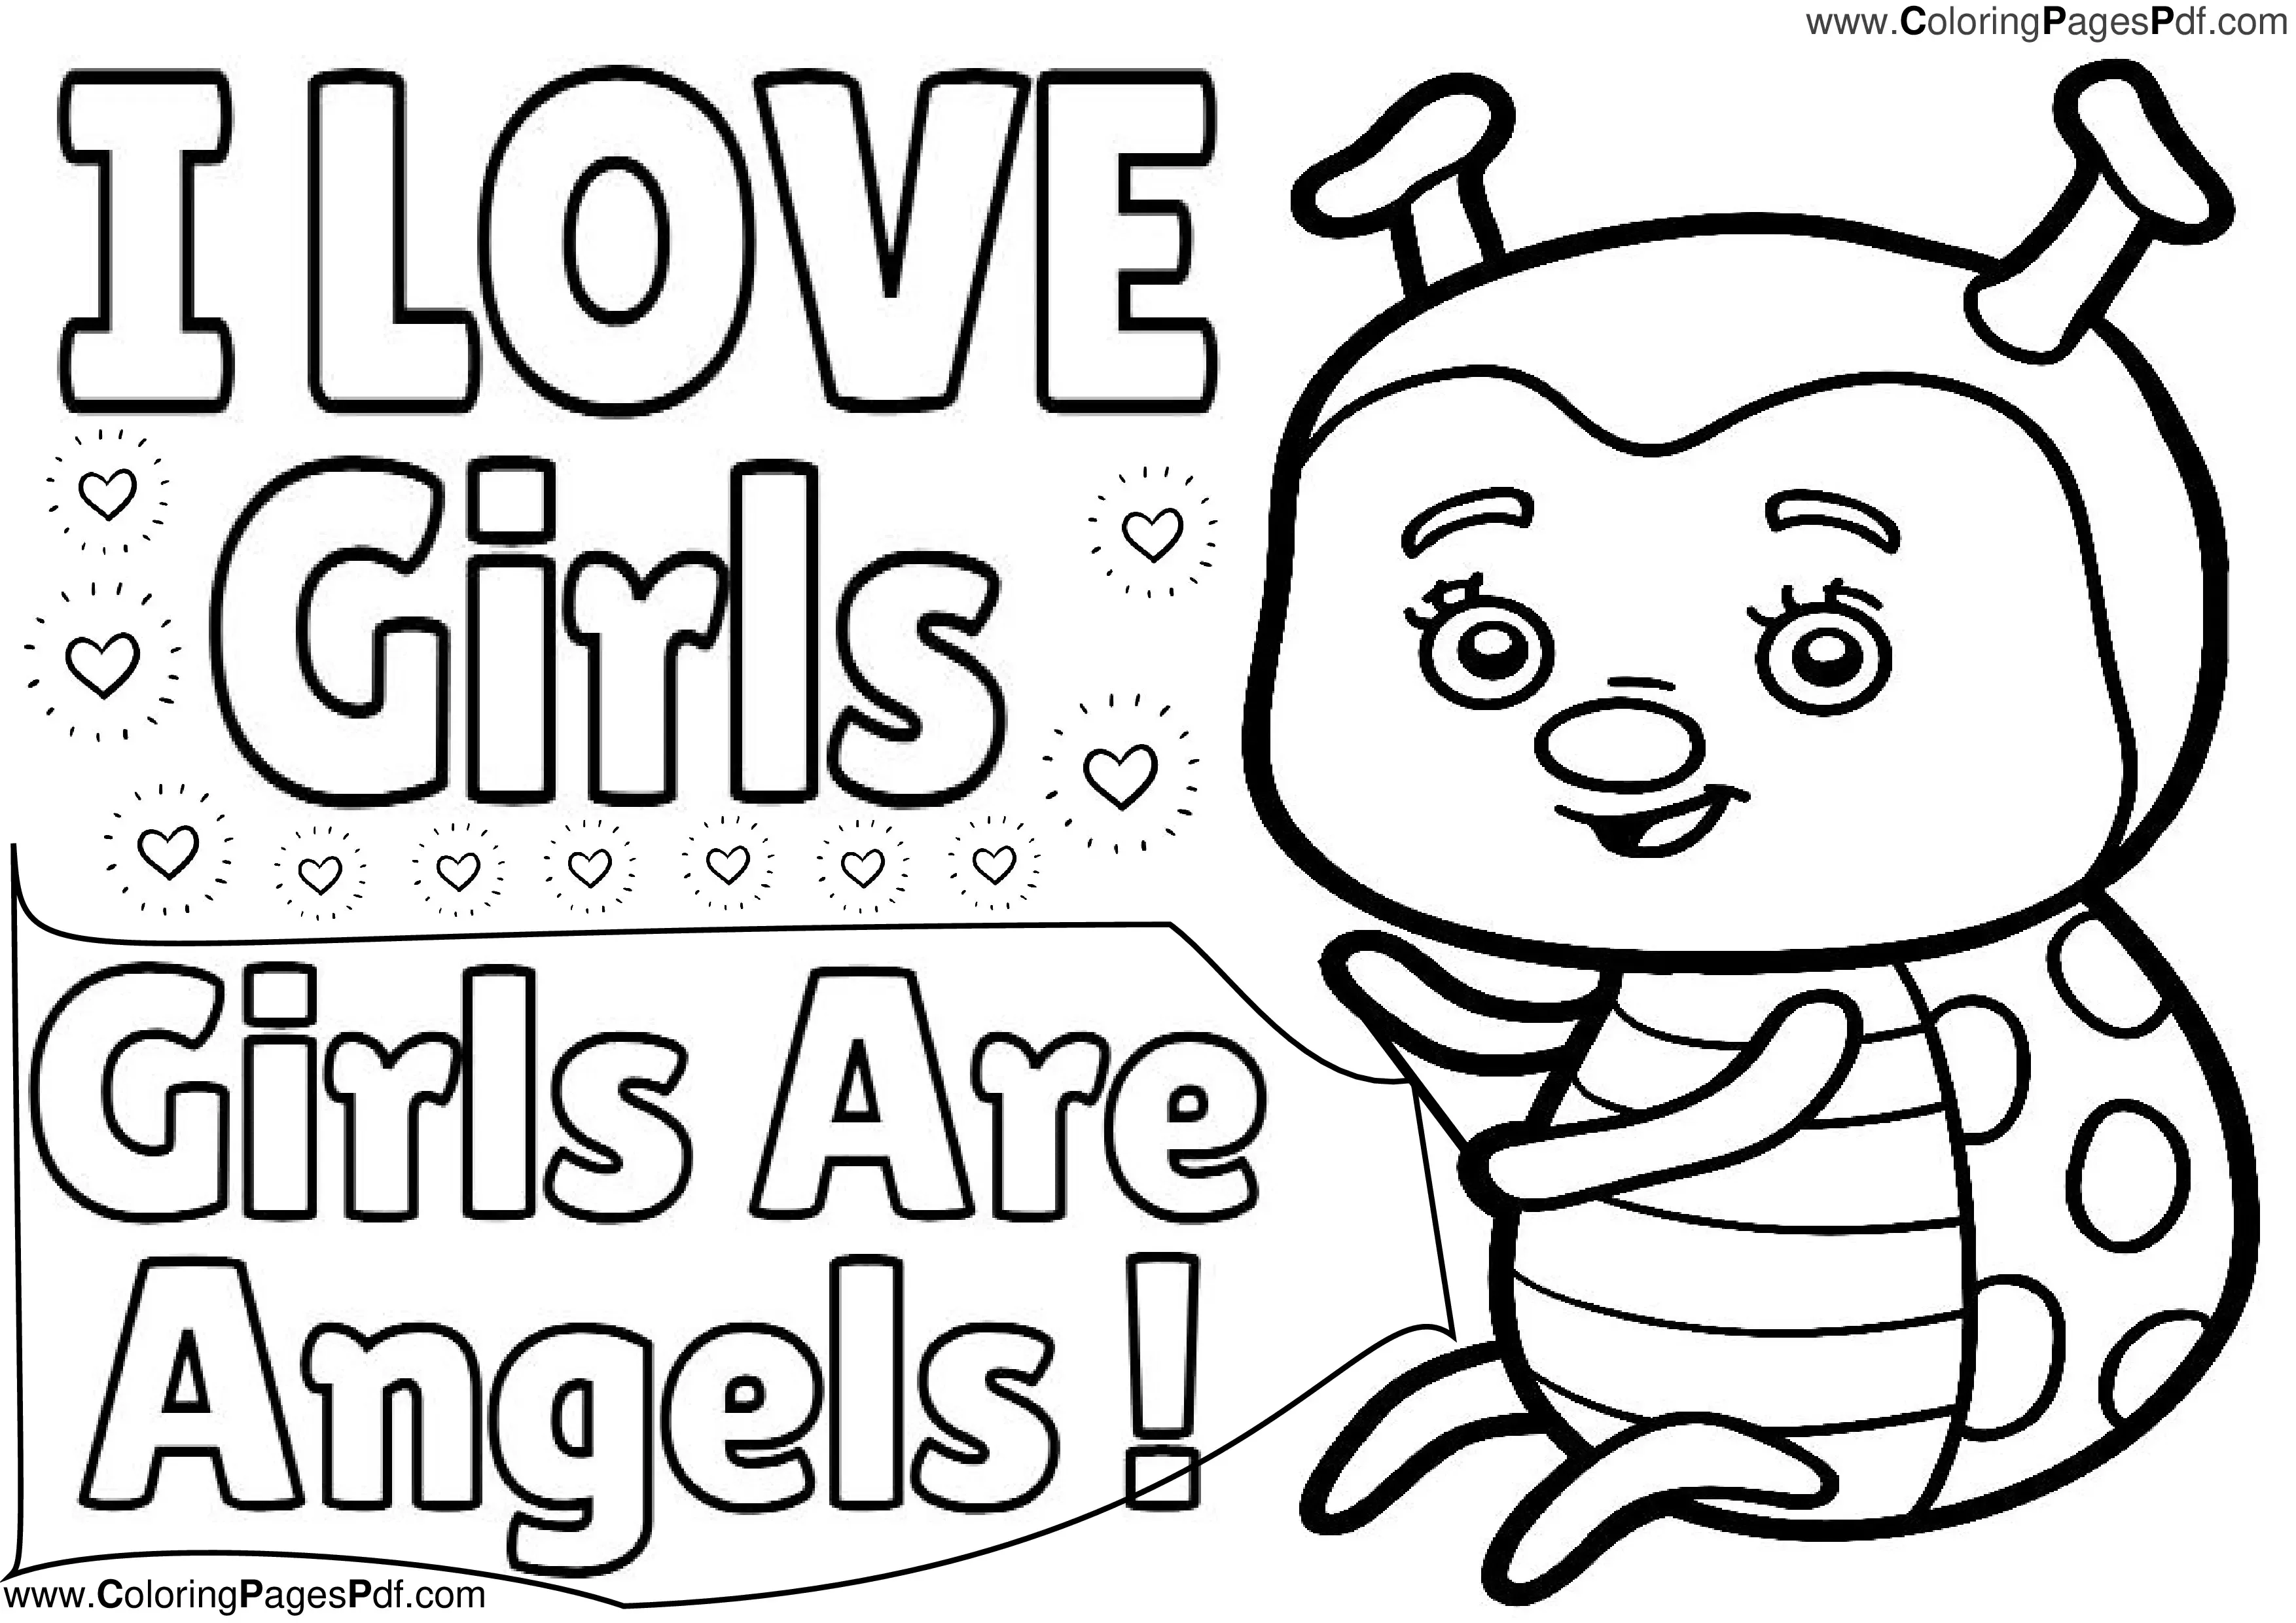 Ladybug coloring pages for girls